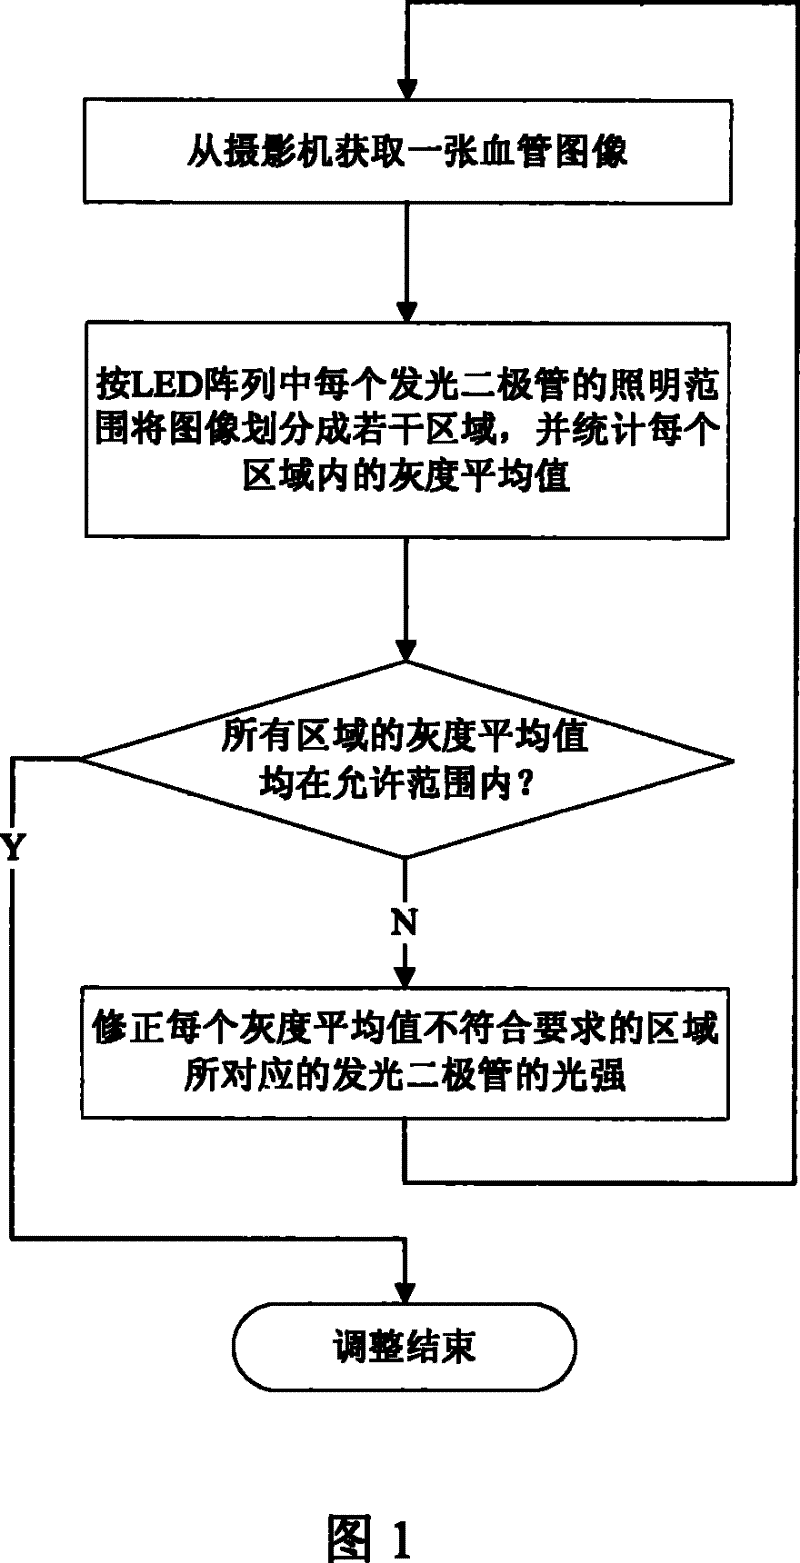 Method and device for collecting blood-vessel image under near infrared light